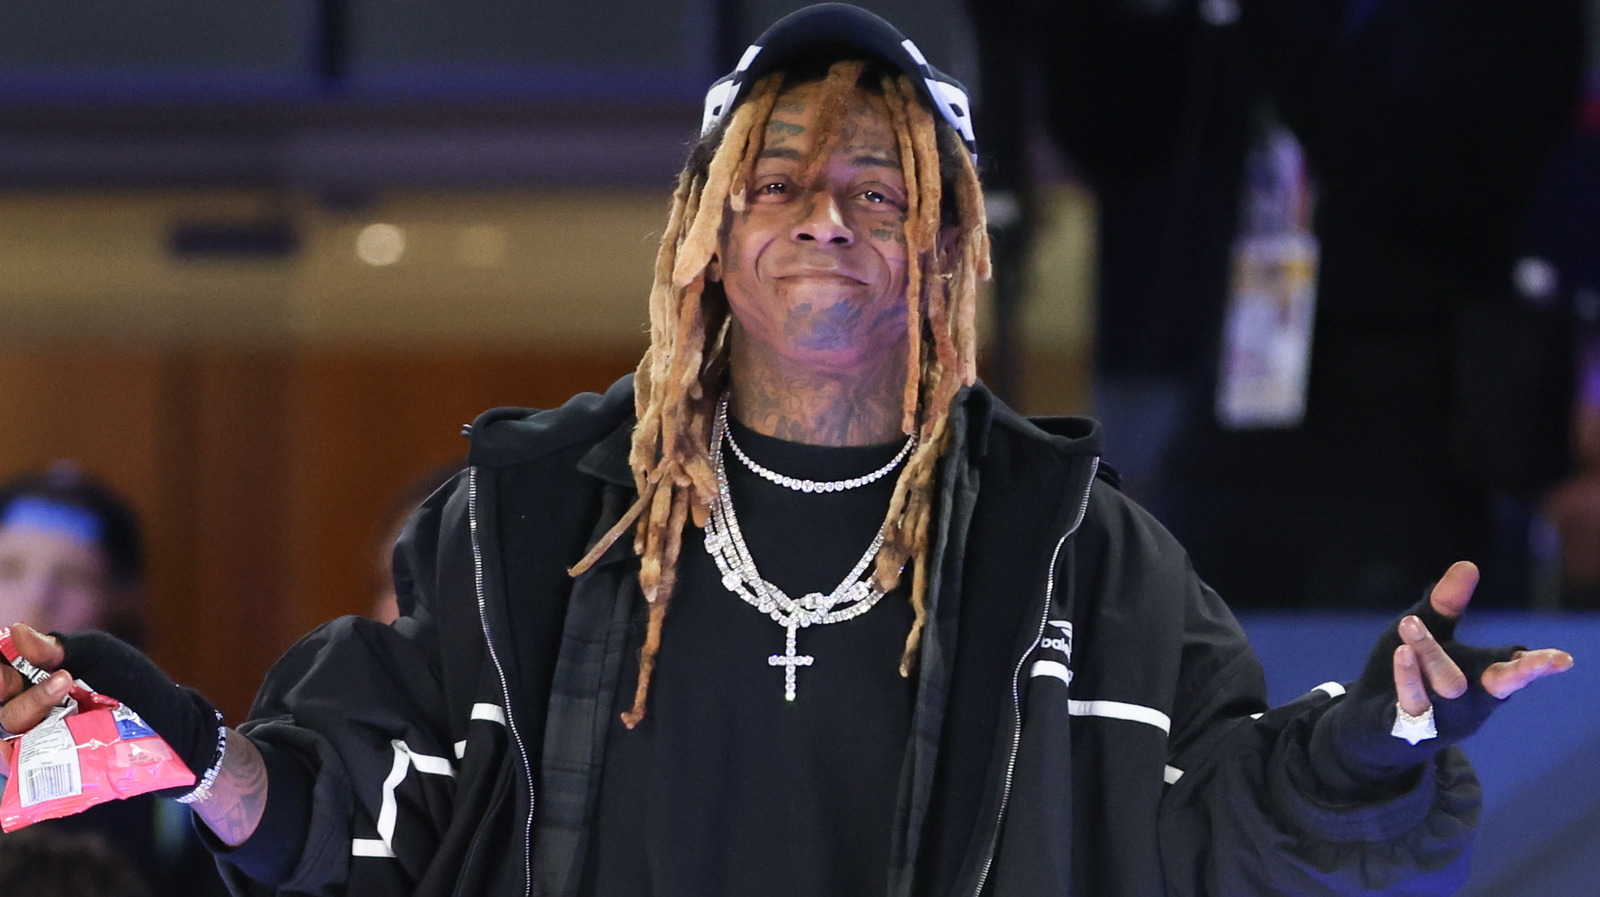 Lil Wayne To Appear At WWE WrestleMania 40, Drew Barrymore Reportedly Also Expected